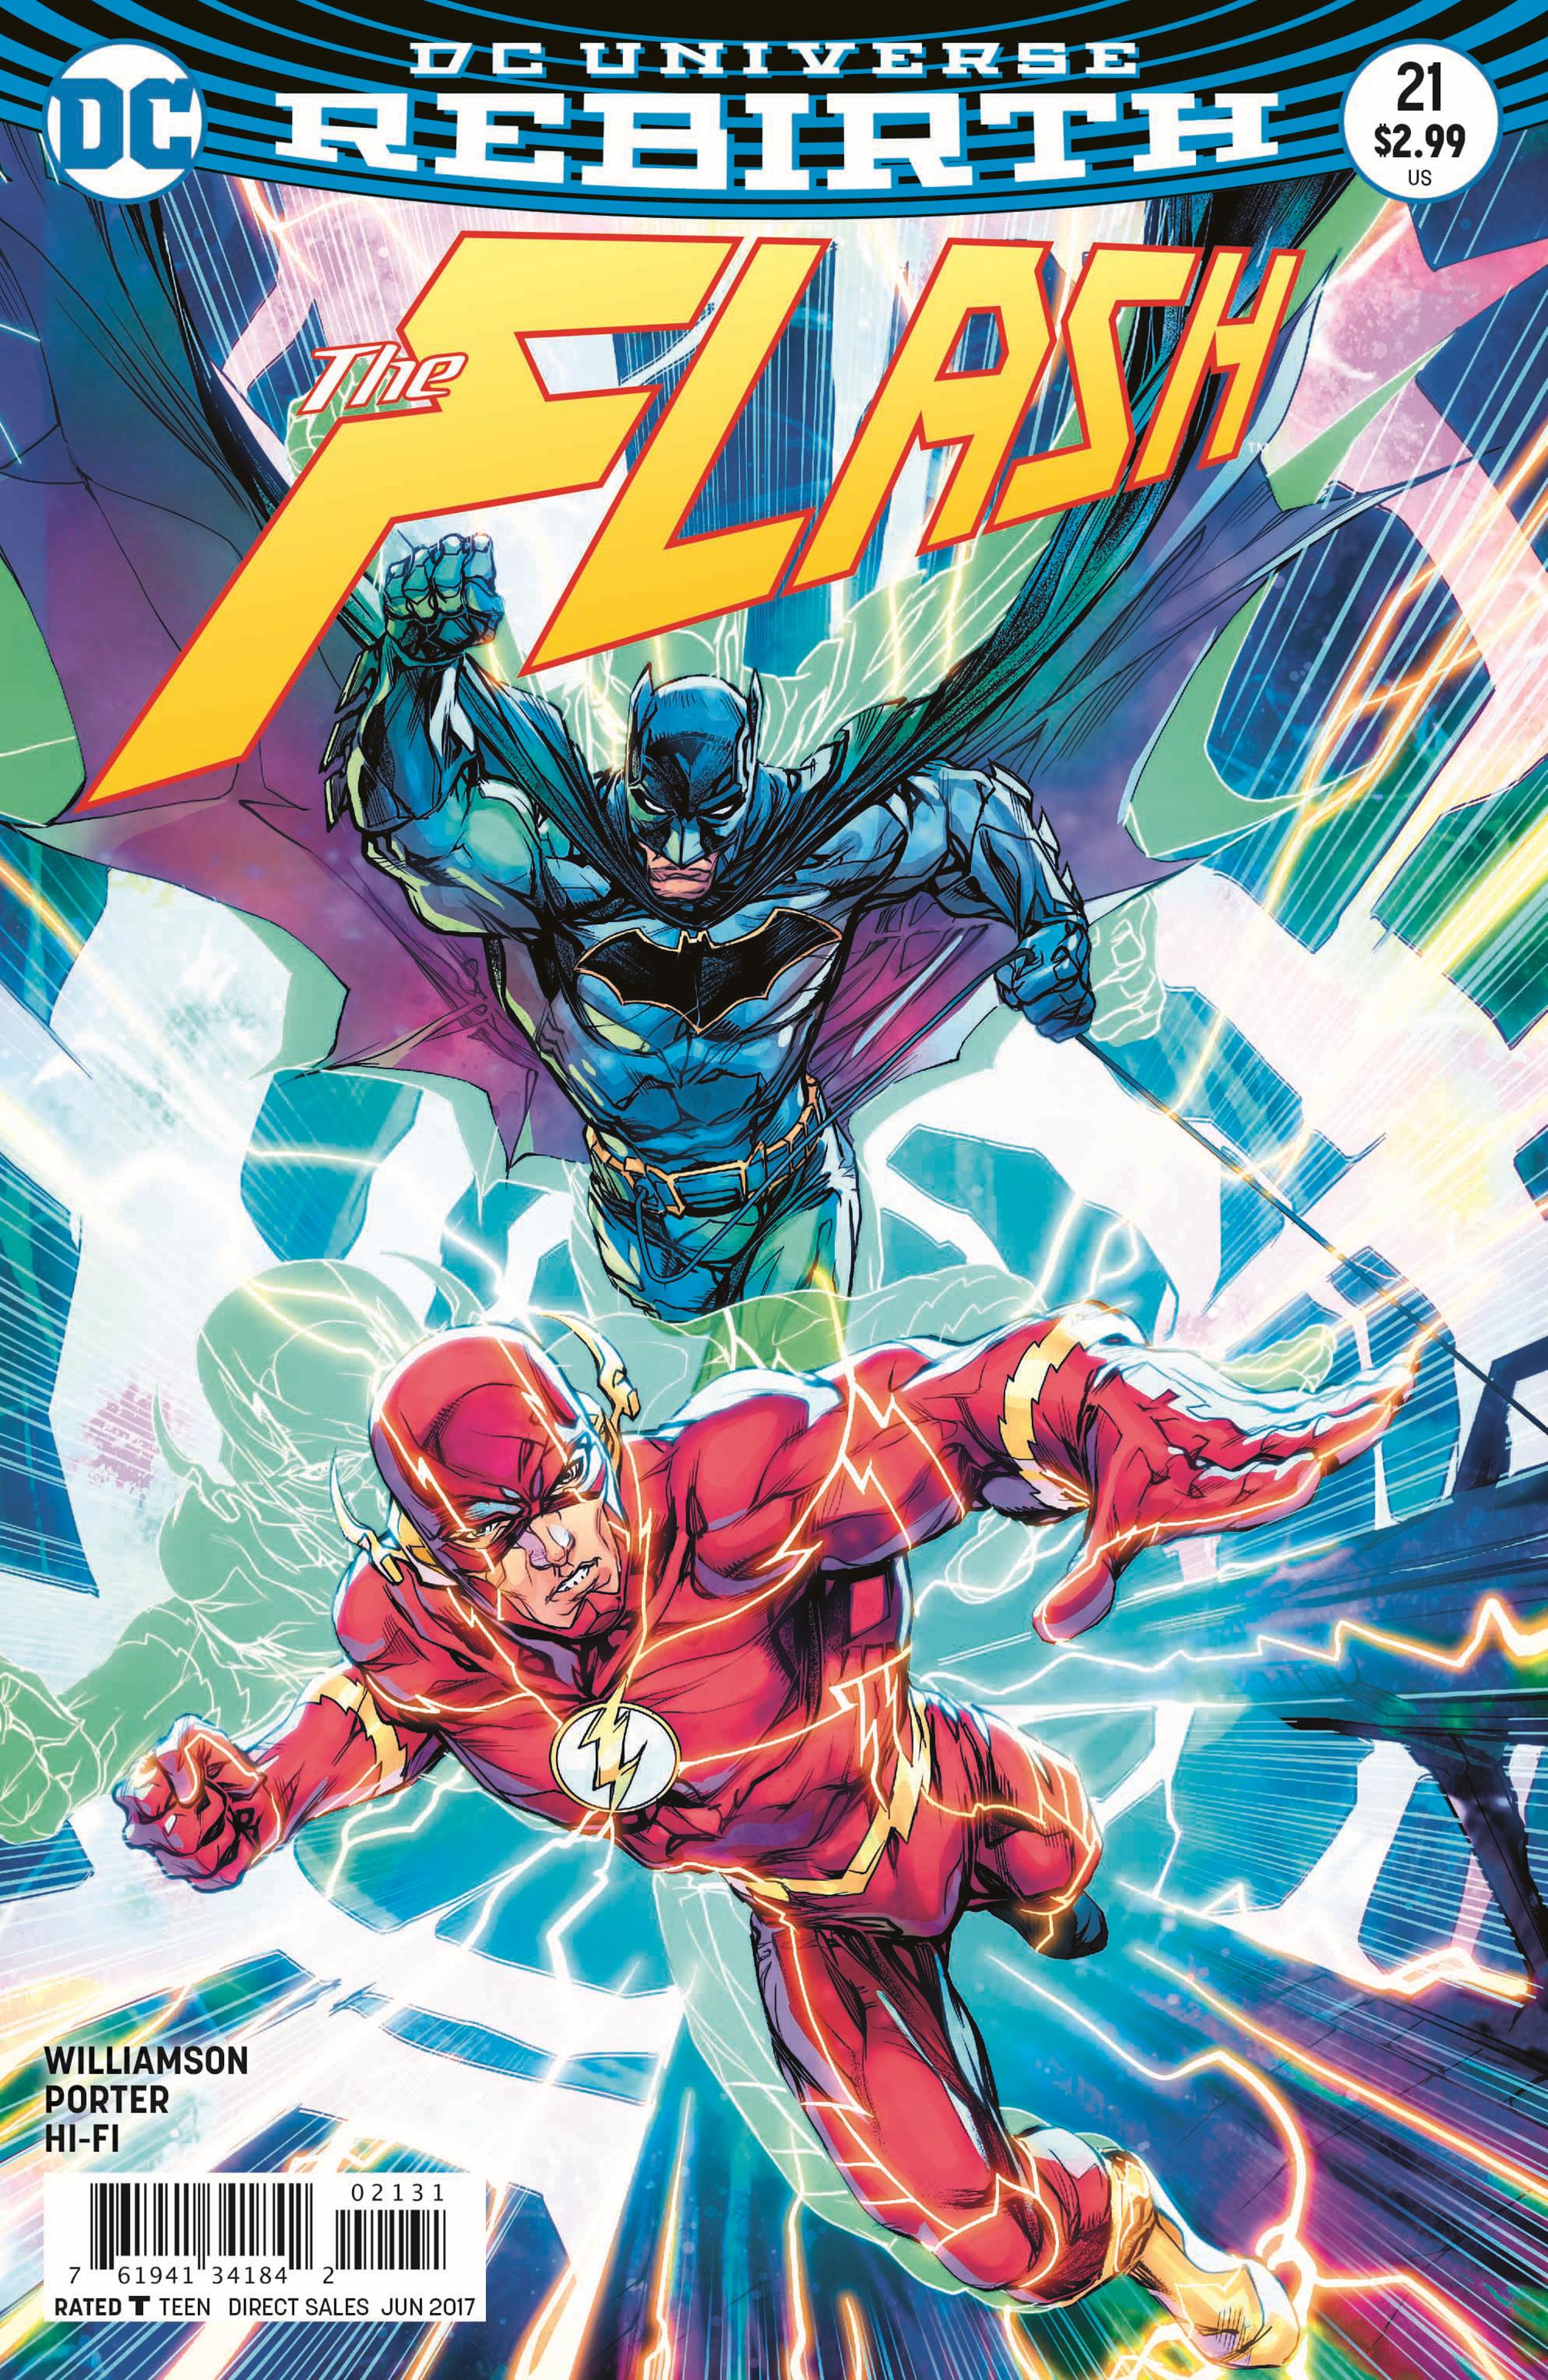 Batman #21 and The Flash #21: The Button Review -- The Wait Is Over!